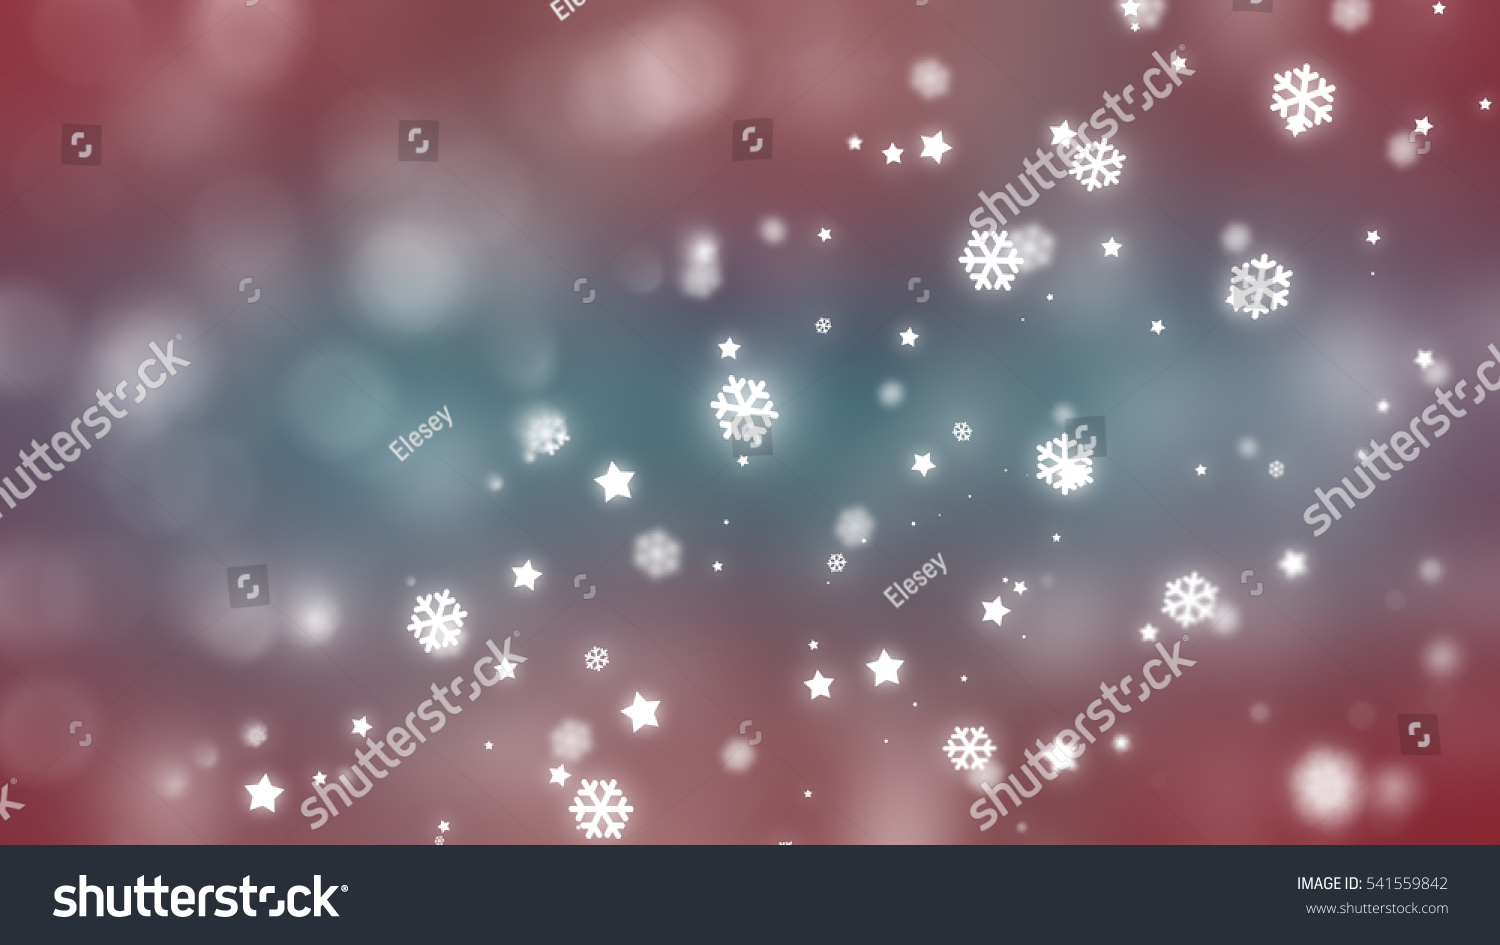 Christmas multicolored background with falling snowflakes. illustration digital. #541559842